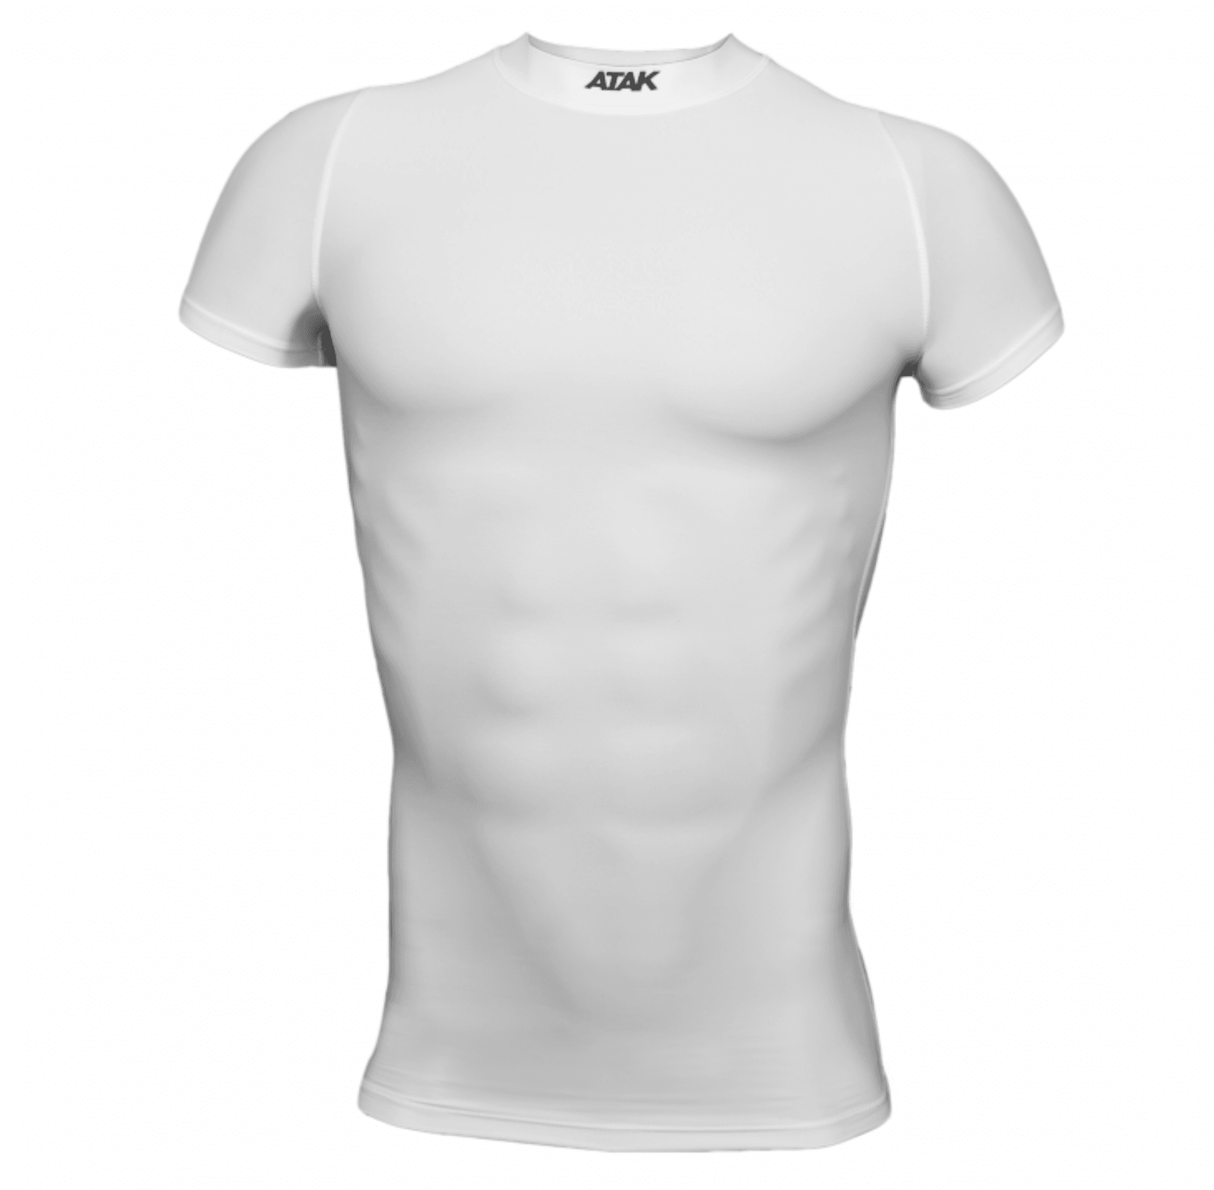 Unisex Short Sleeve Compression Shirt |Compression | ATAK Sports | Absolute Rugby